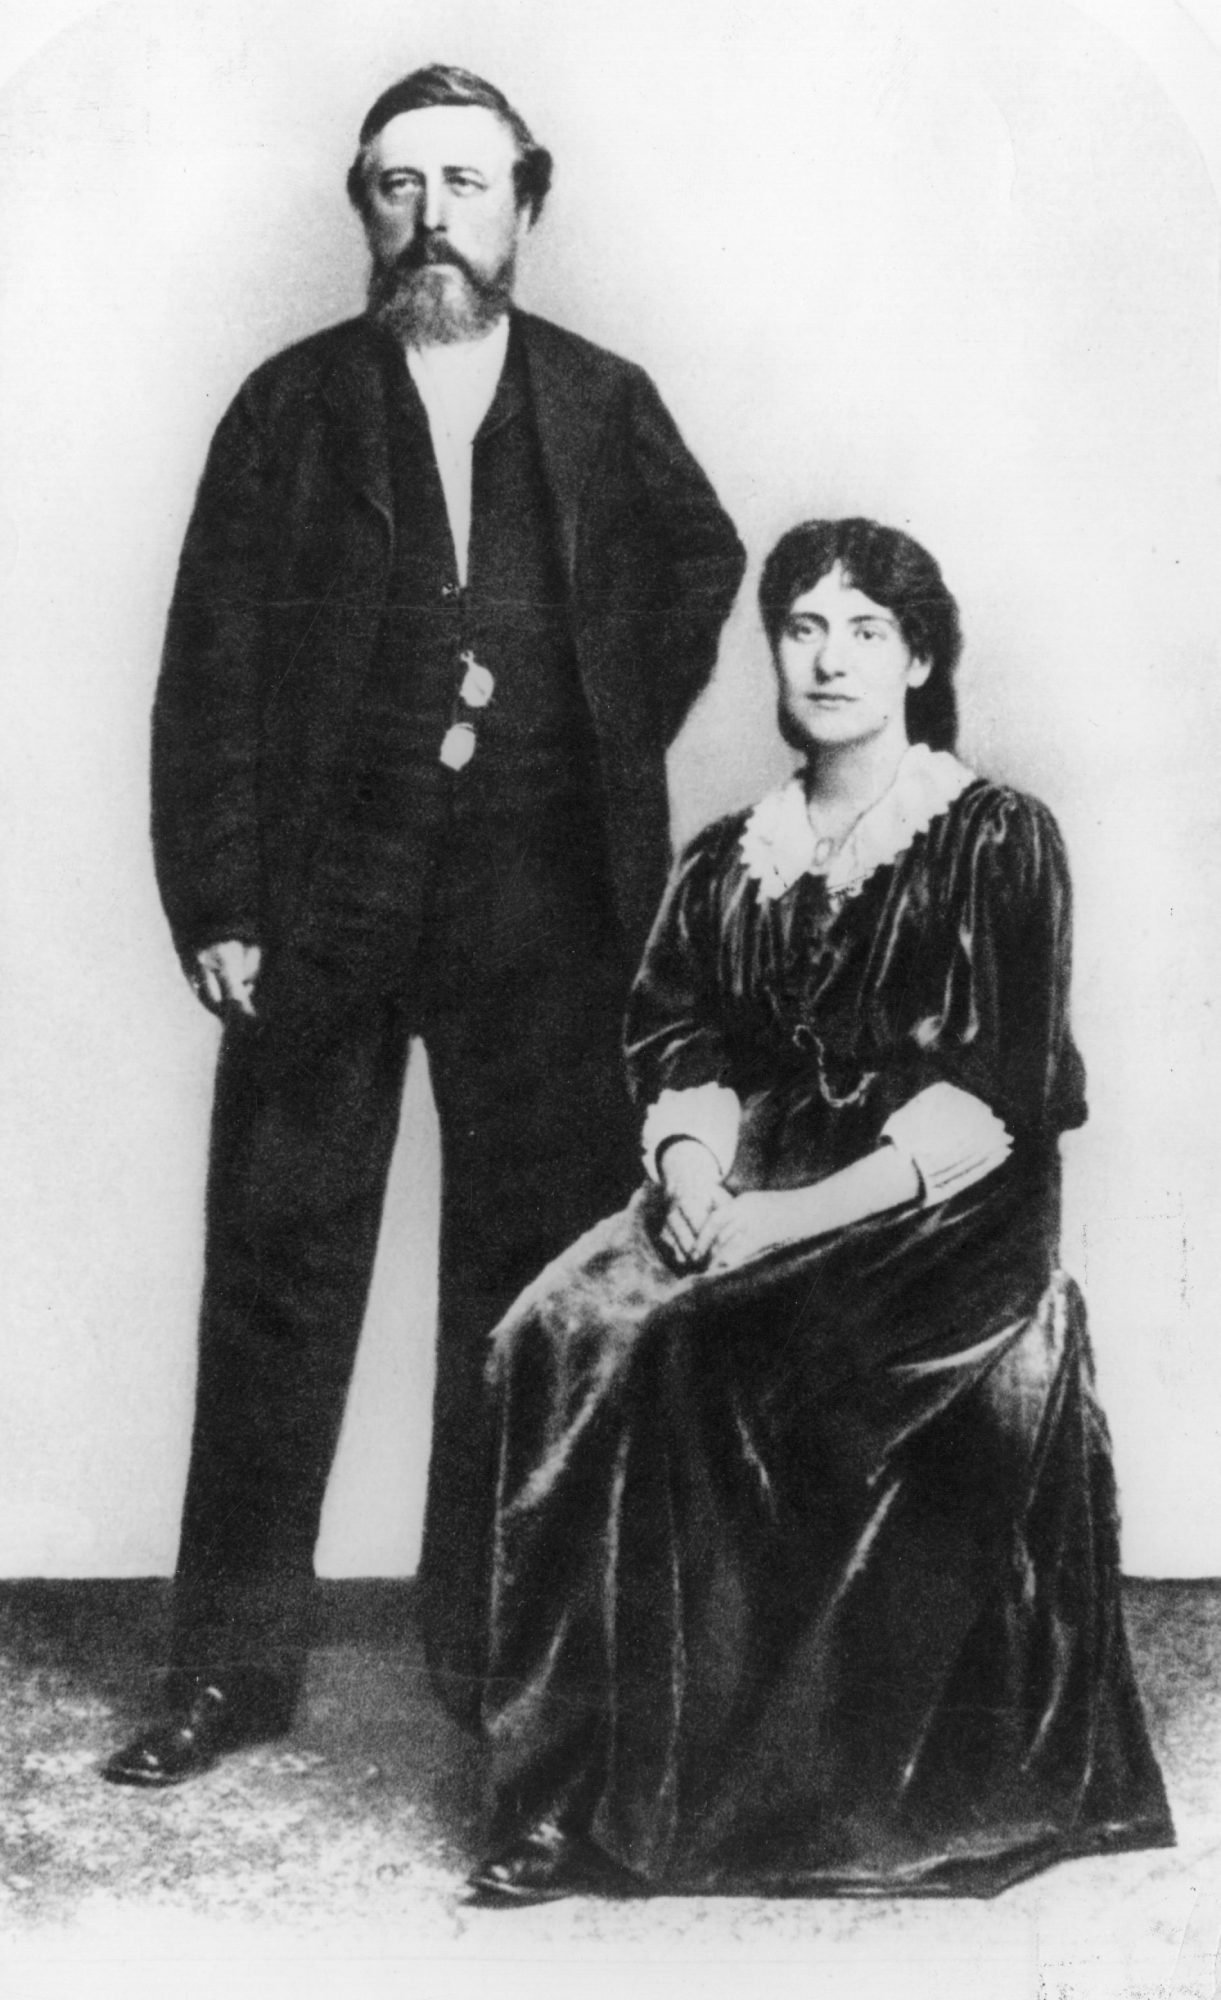 circa 1870: German socialist Wilhelm Liebknecht (1826 - 1900) with Tussy Marx, the daughter of Karl Marx. (Photo by Hulton Archive/Getty Images)